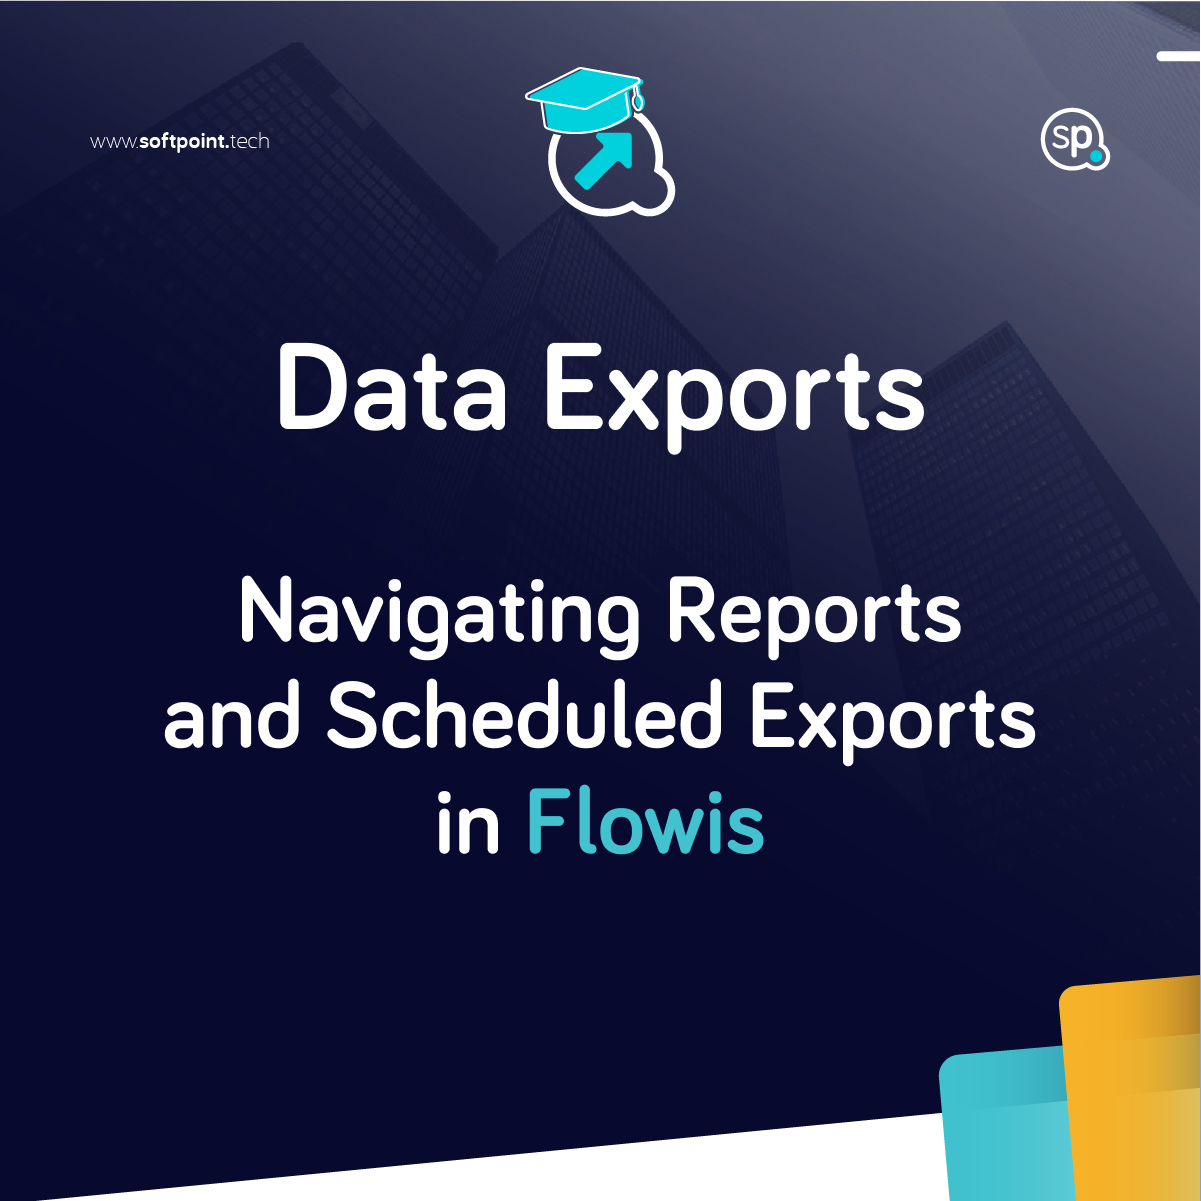 Data Exports – Navigating Reports and Scheduled Exports